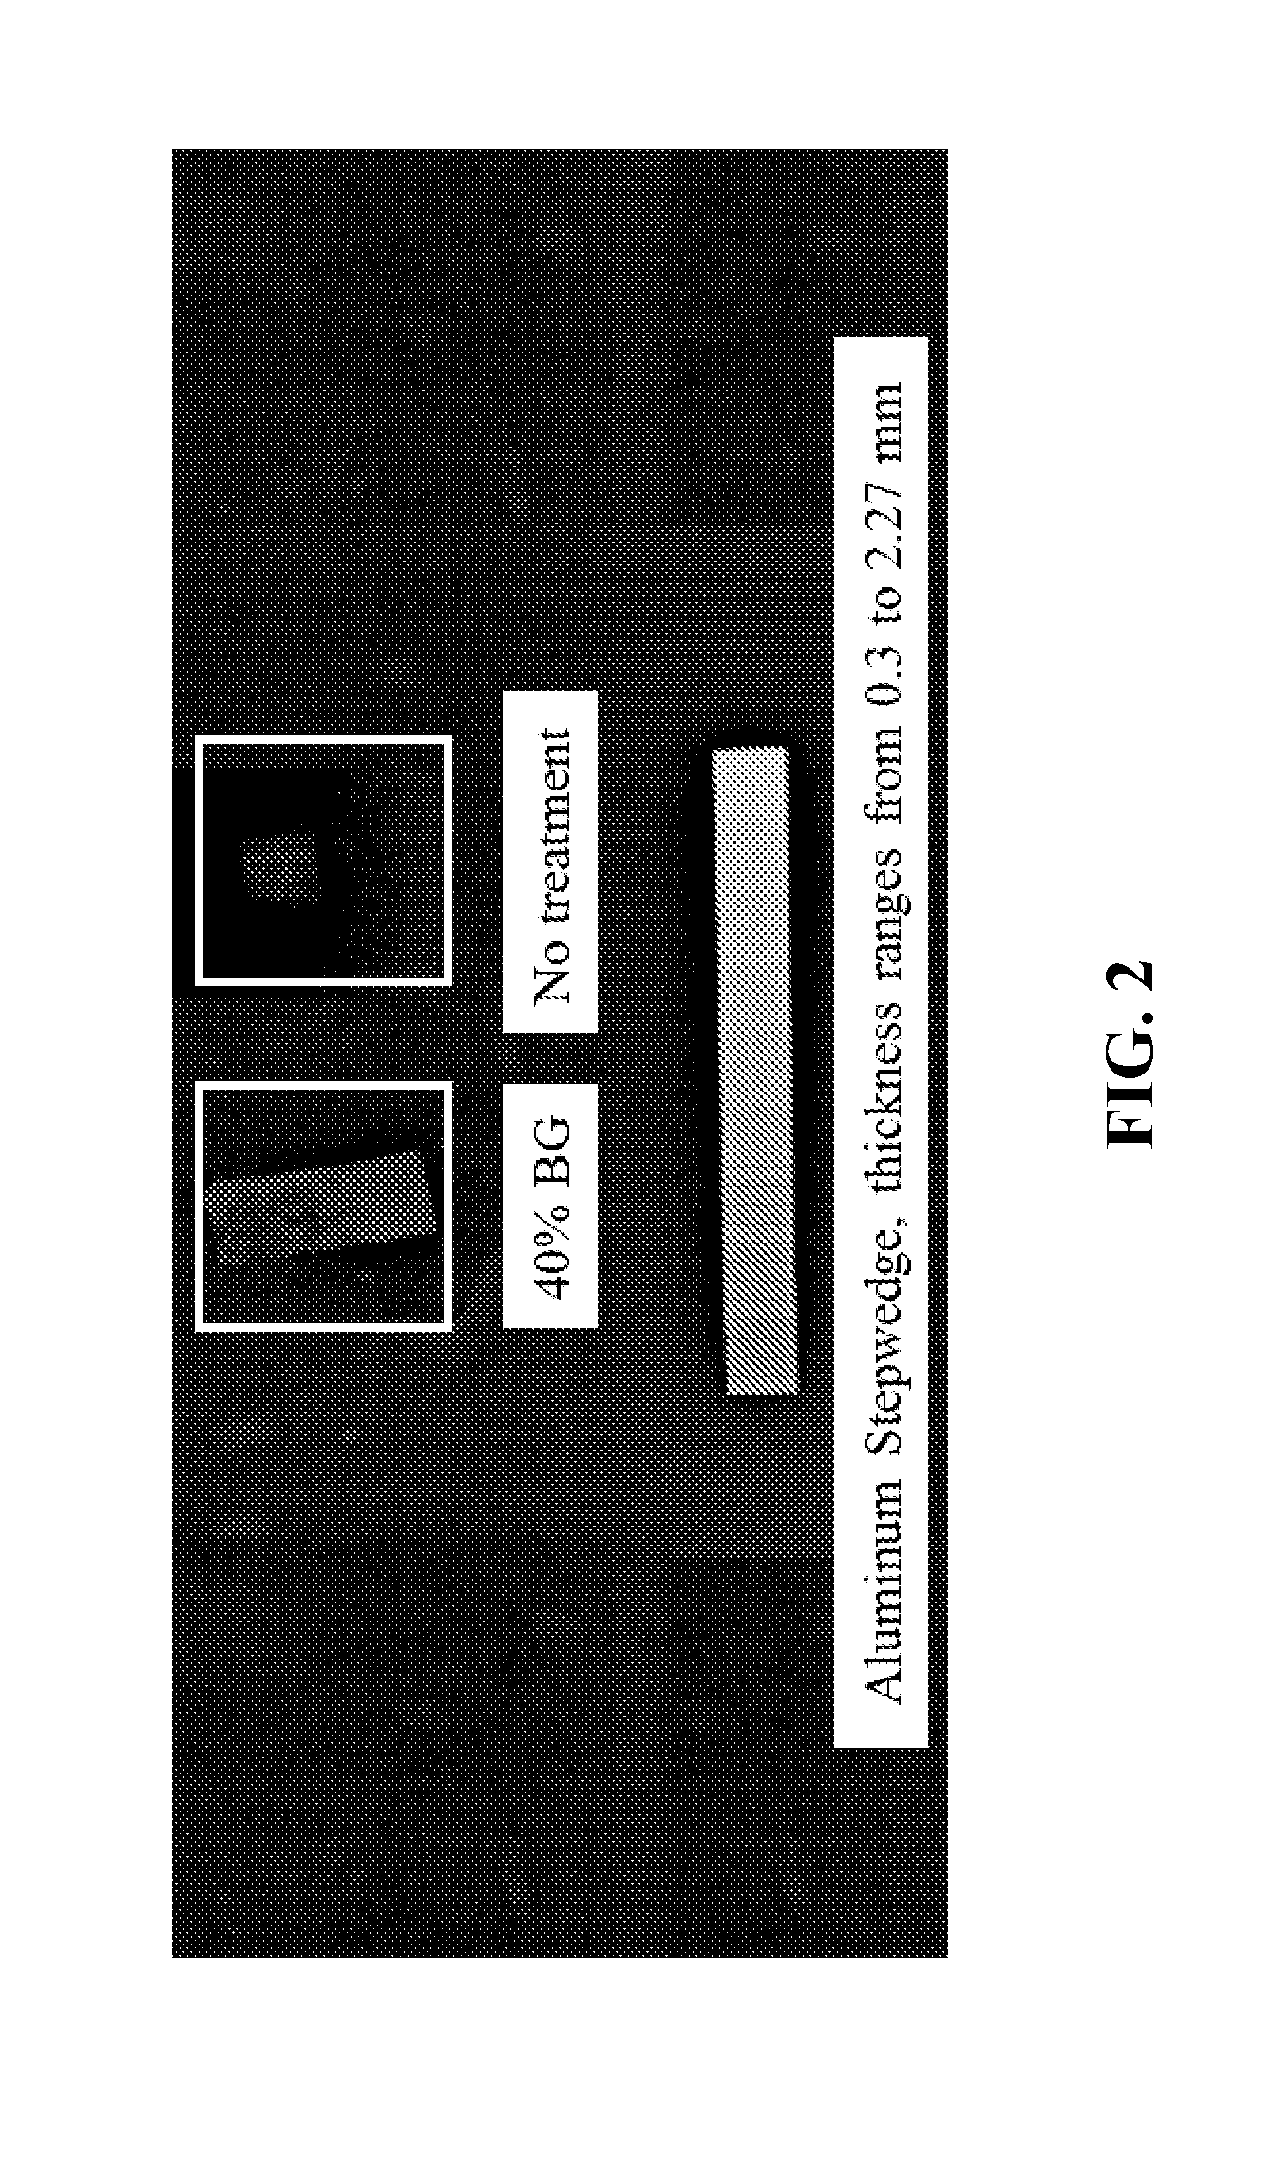 Bone Graft Substitute Containing a Temporary Contrast Agent and a Method of Generating Such and A Method of Use Thereof